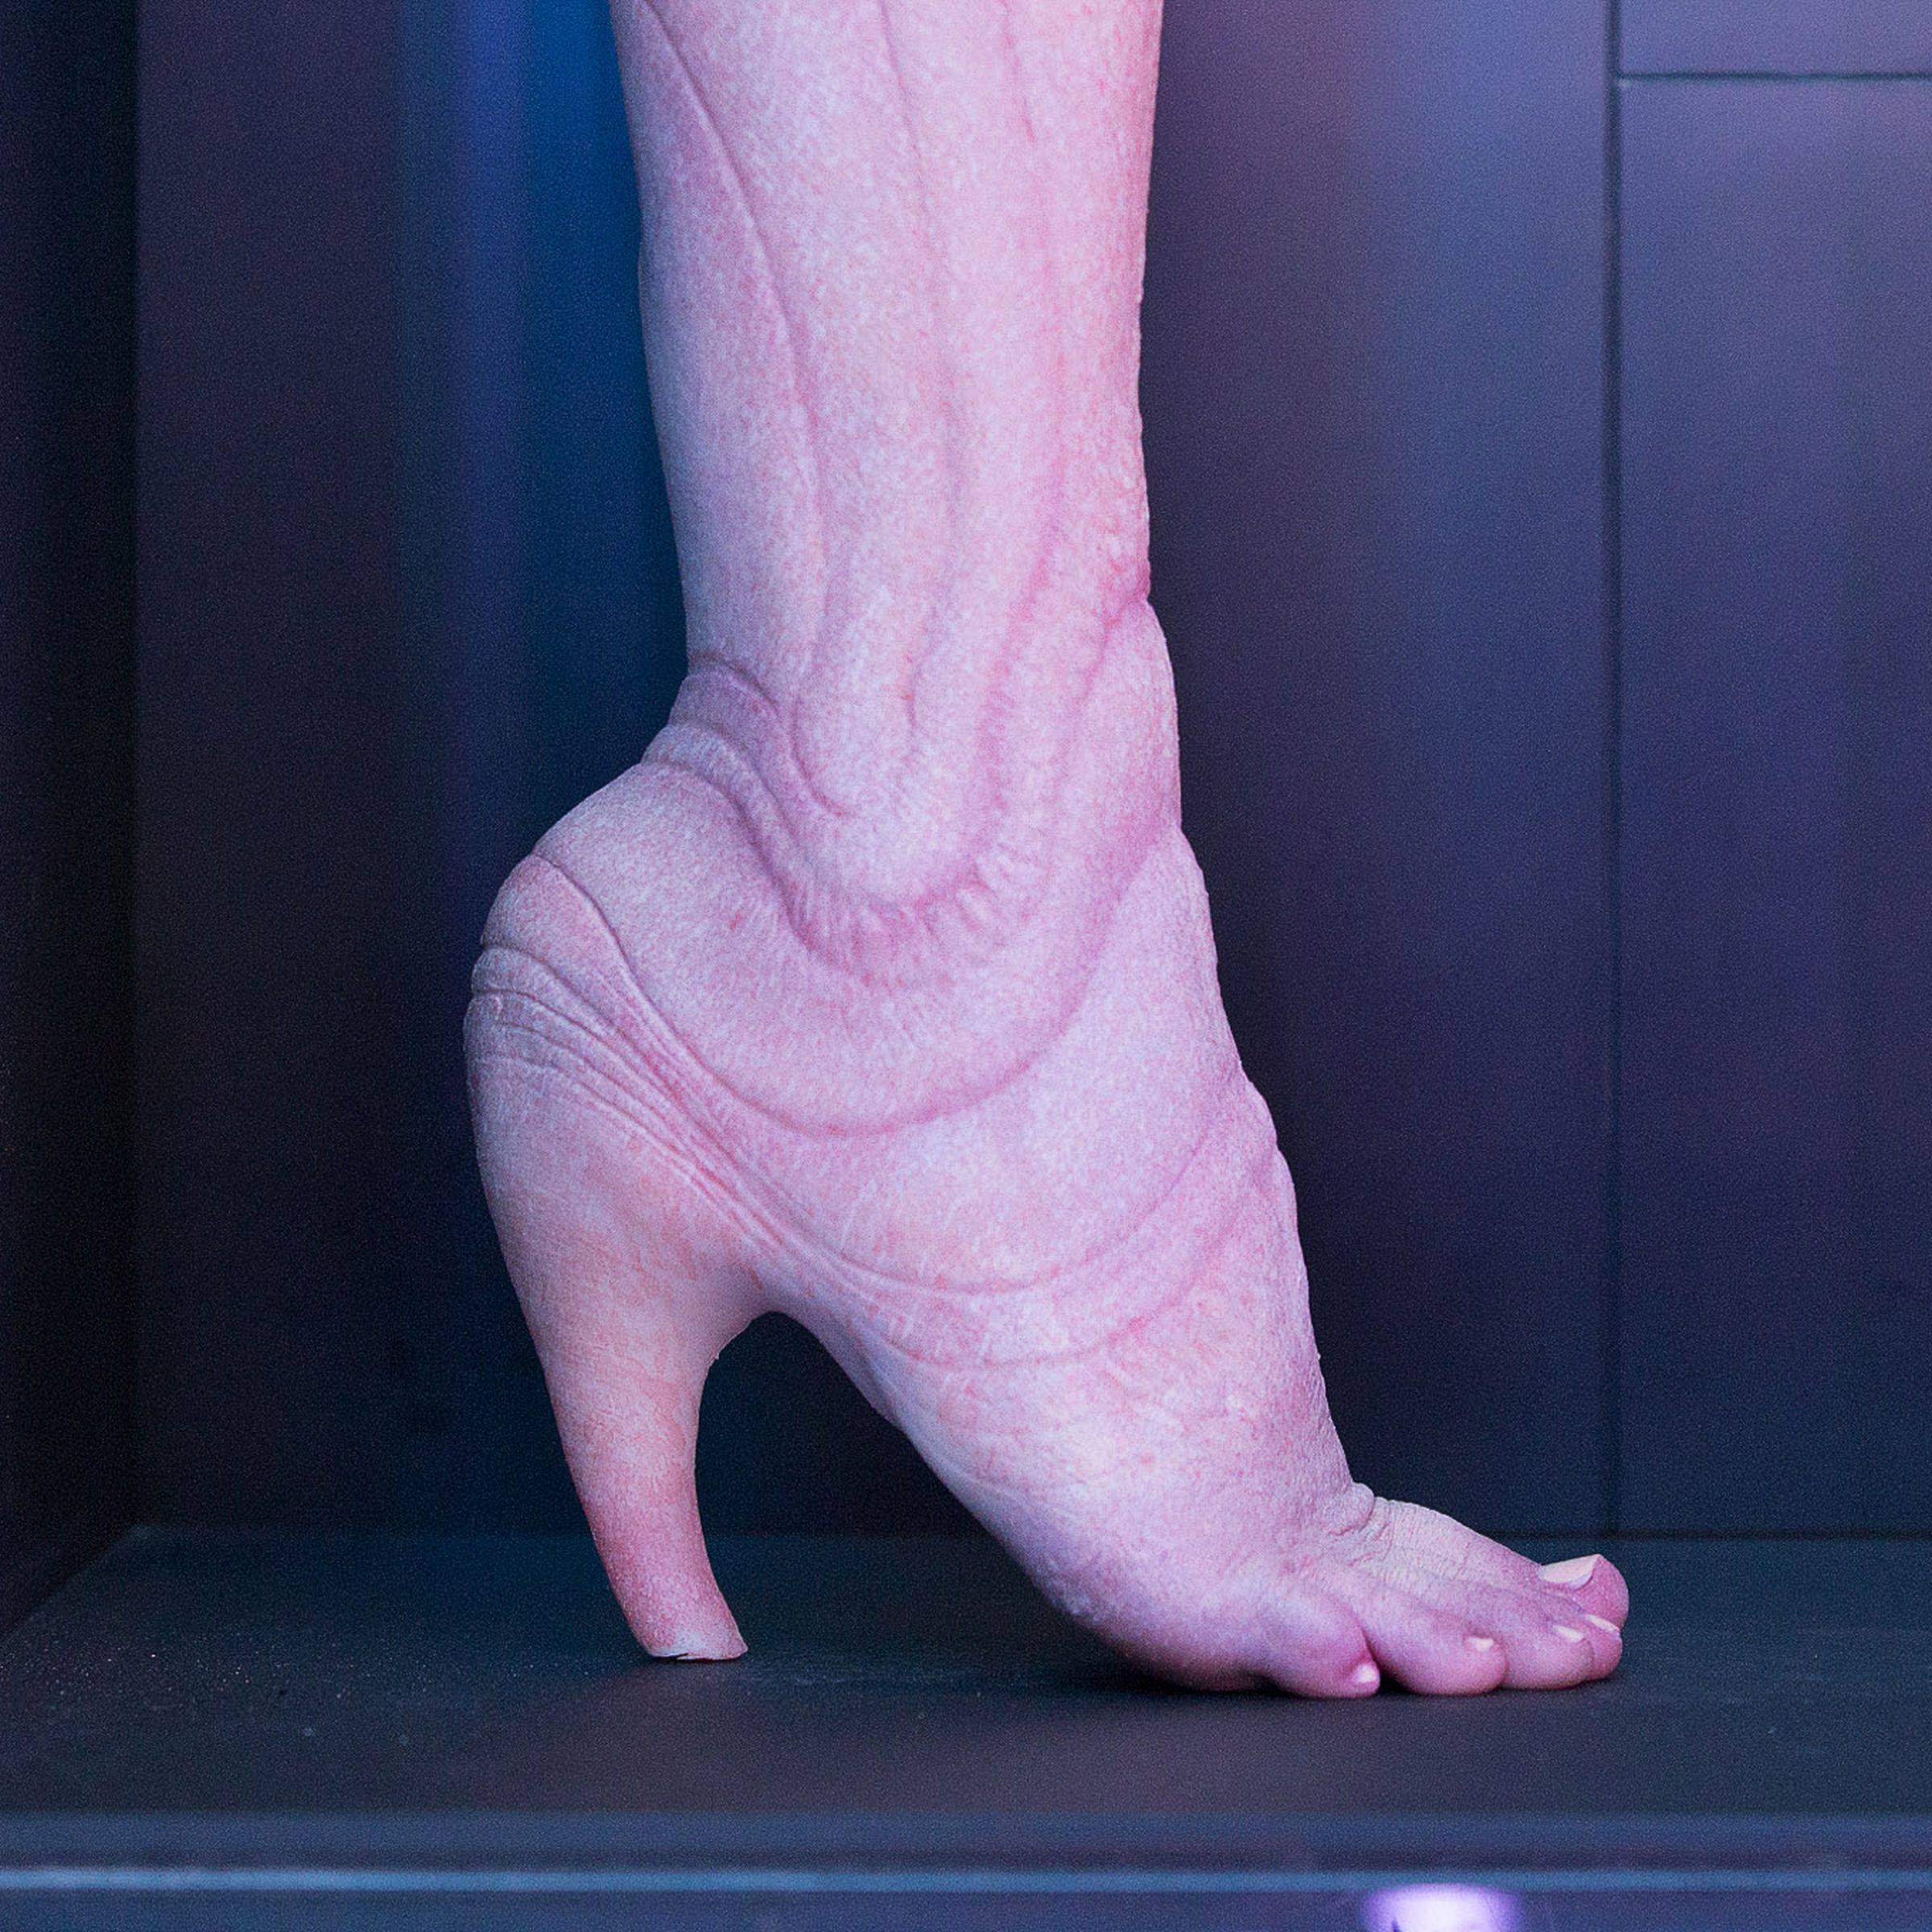 Viper is part of A. Human’s ‘biological heel’ series. It is displayed here on a live model.